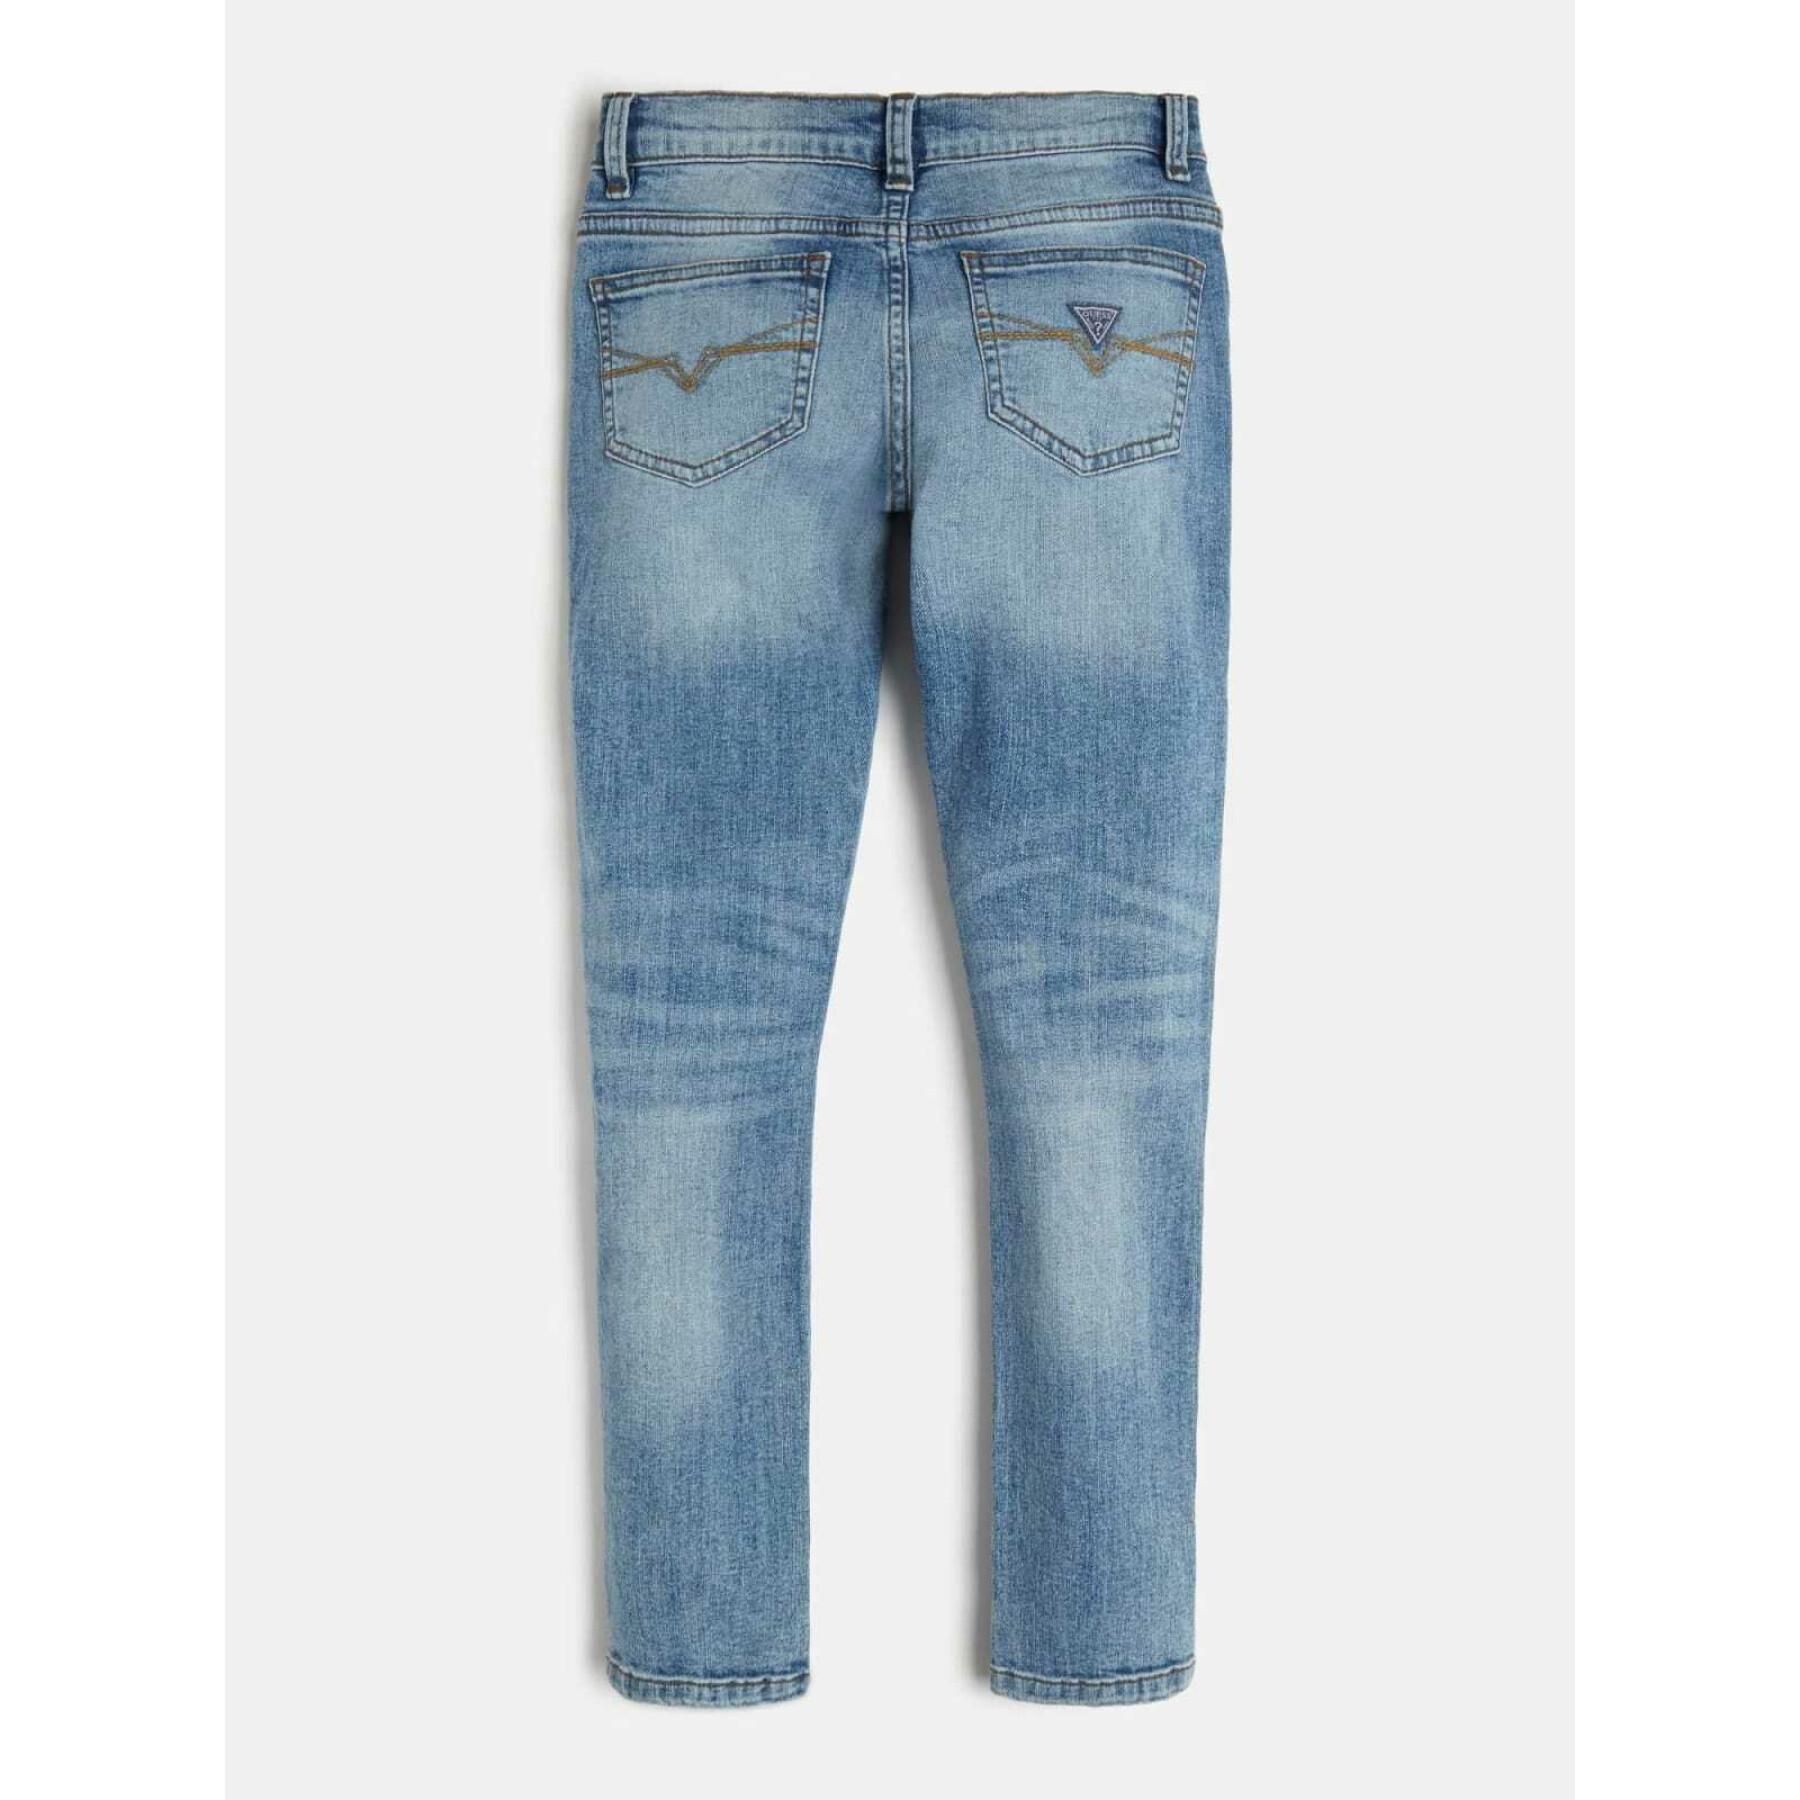 Child skinny jeans Guess